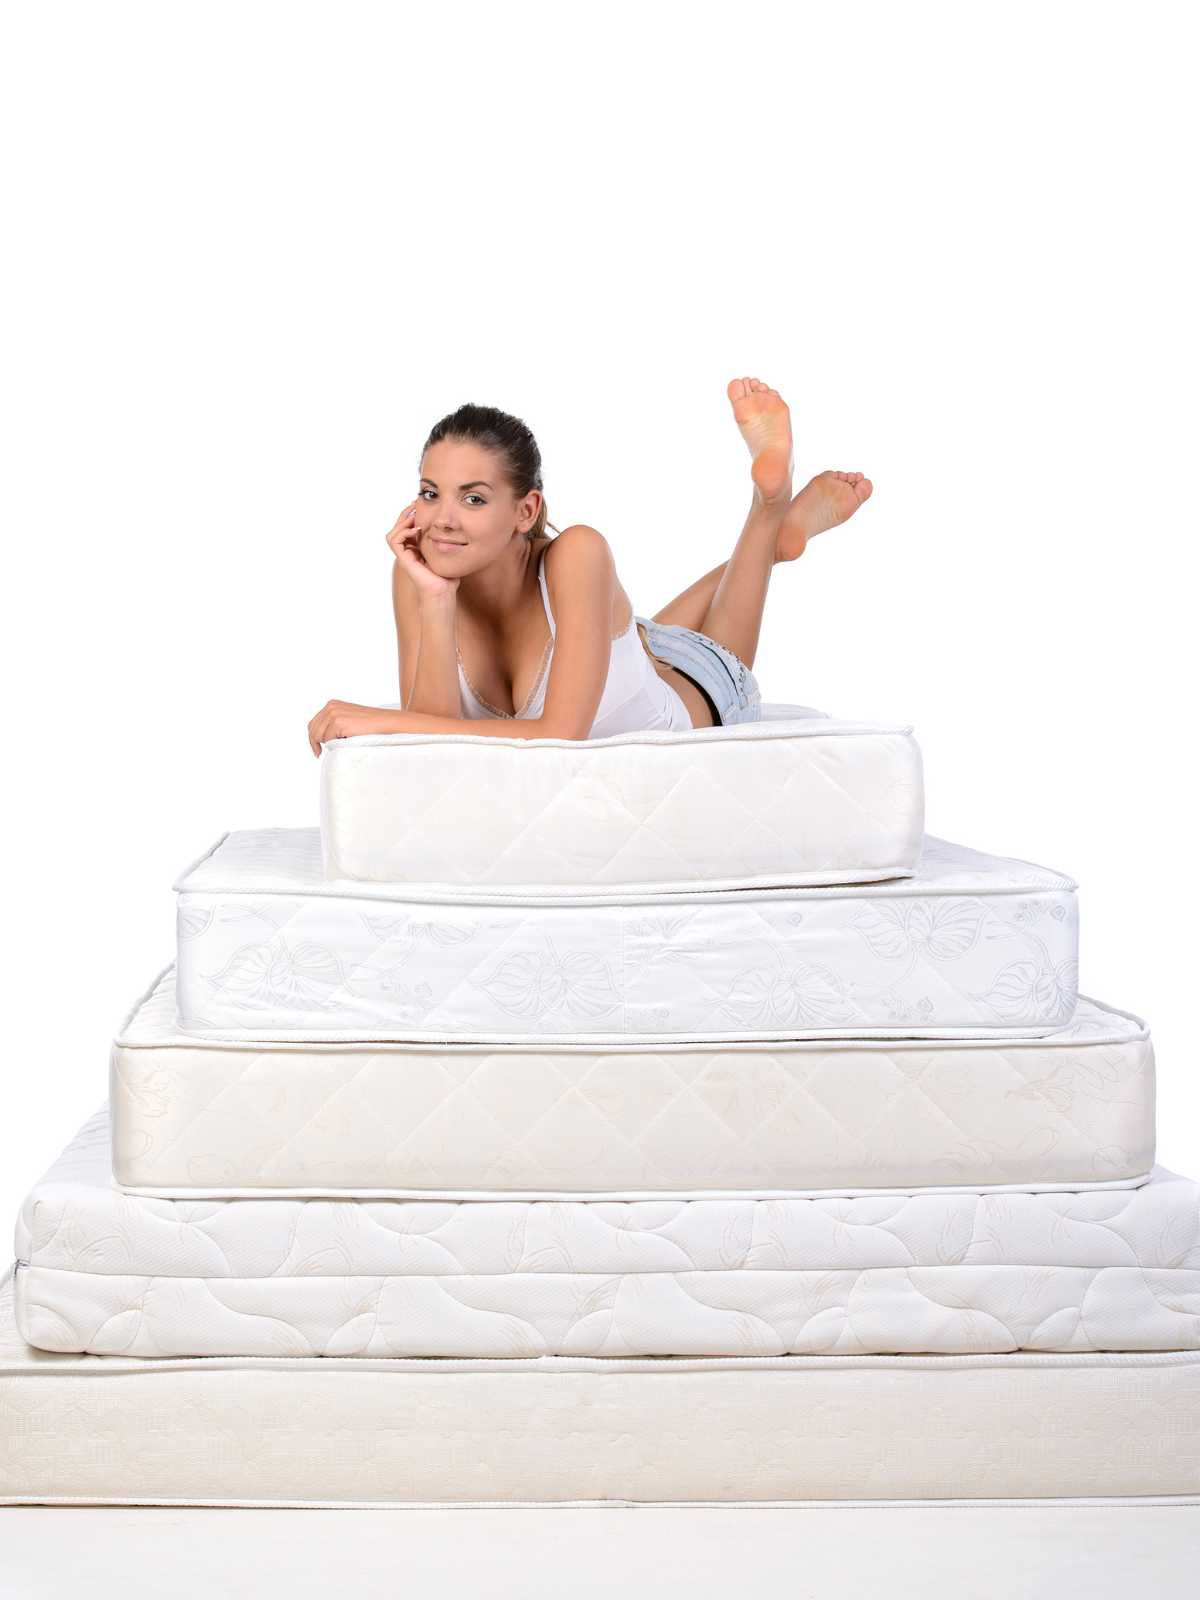 How To Get Old Stains Out Of A Mattress